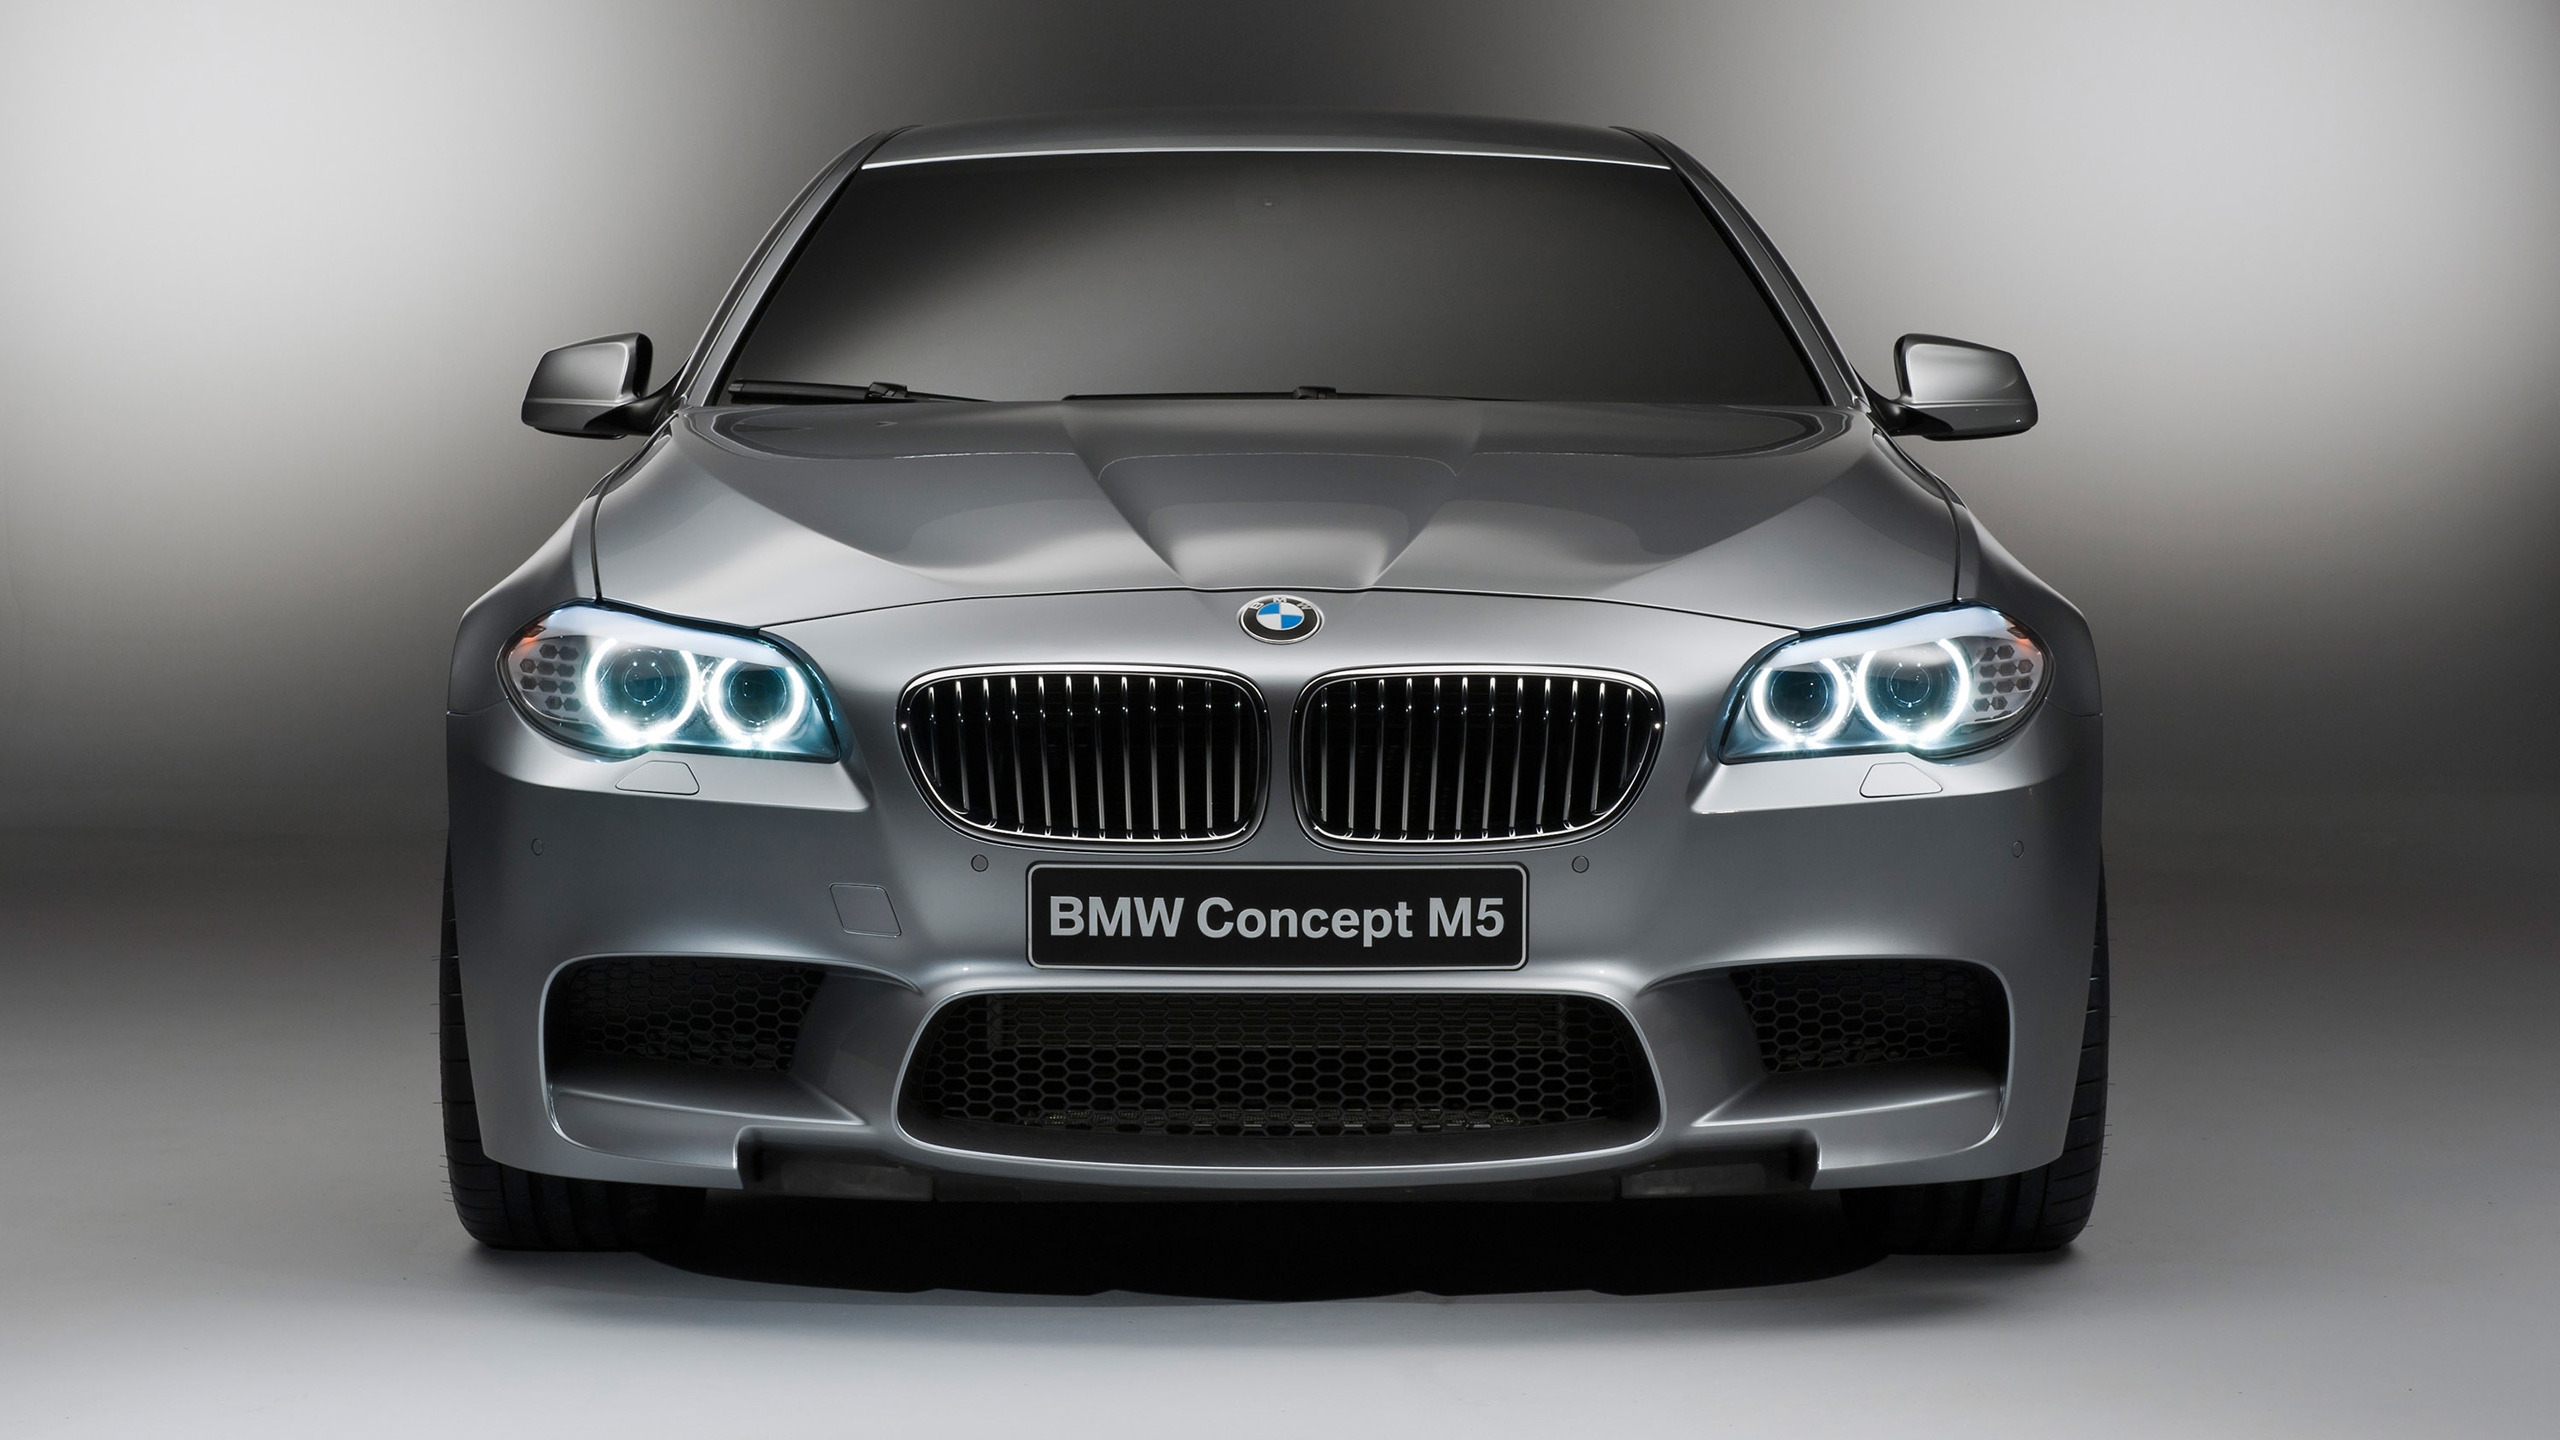 BMW M5 Concept 2012 Front for 2560x1440 HDTV resolution